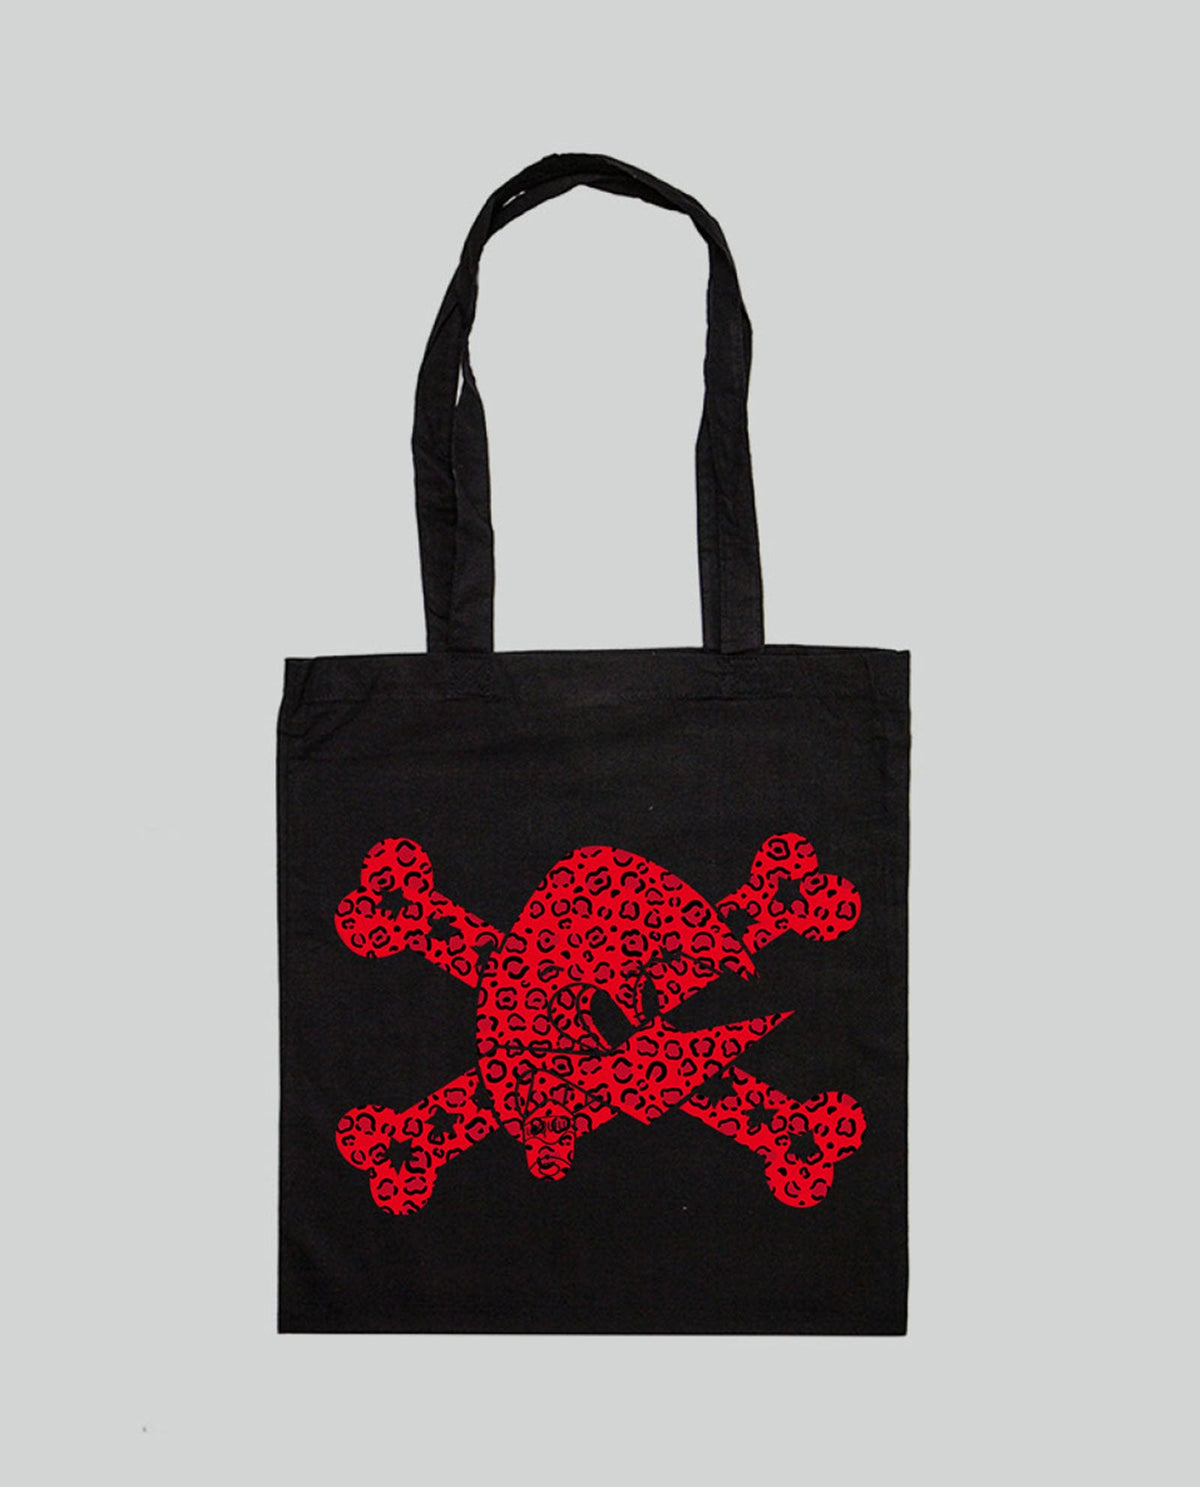 Loquillo - Tote Bag "Girly" Terciopelo - D2fy · Rocktud - Loquillo